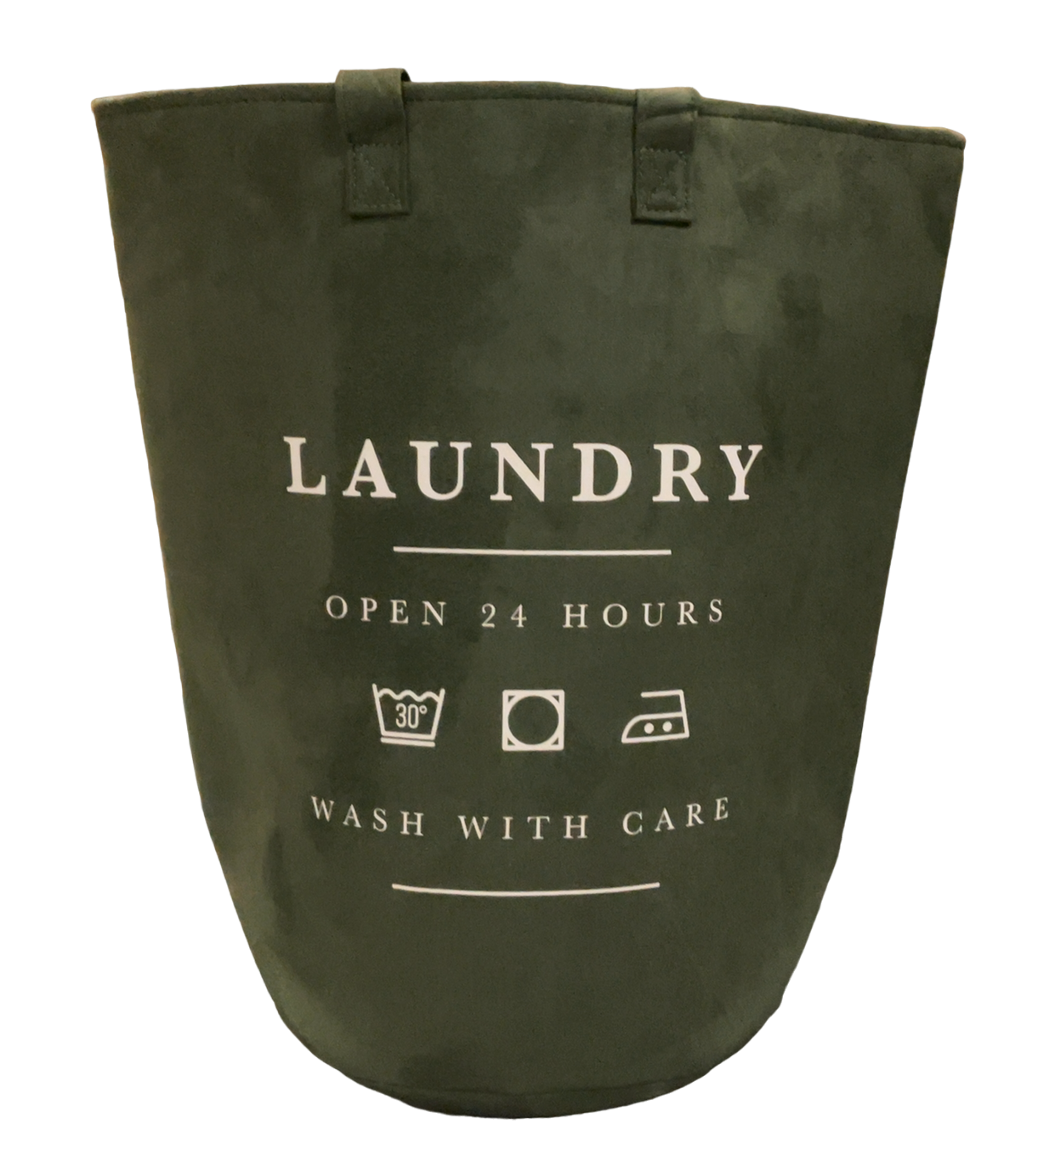 Suede Laundry Bag with Handles and Drawstring Closure